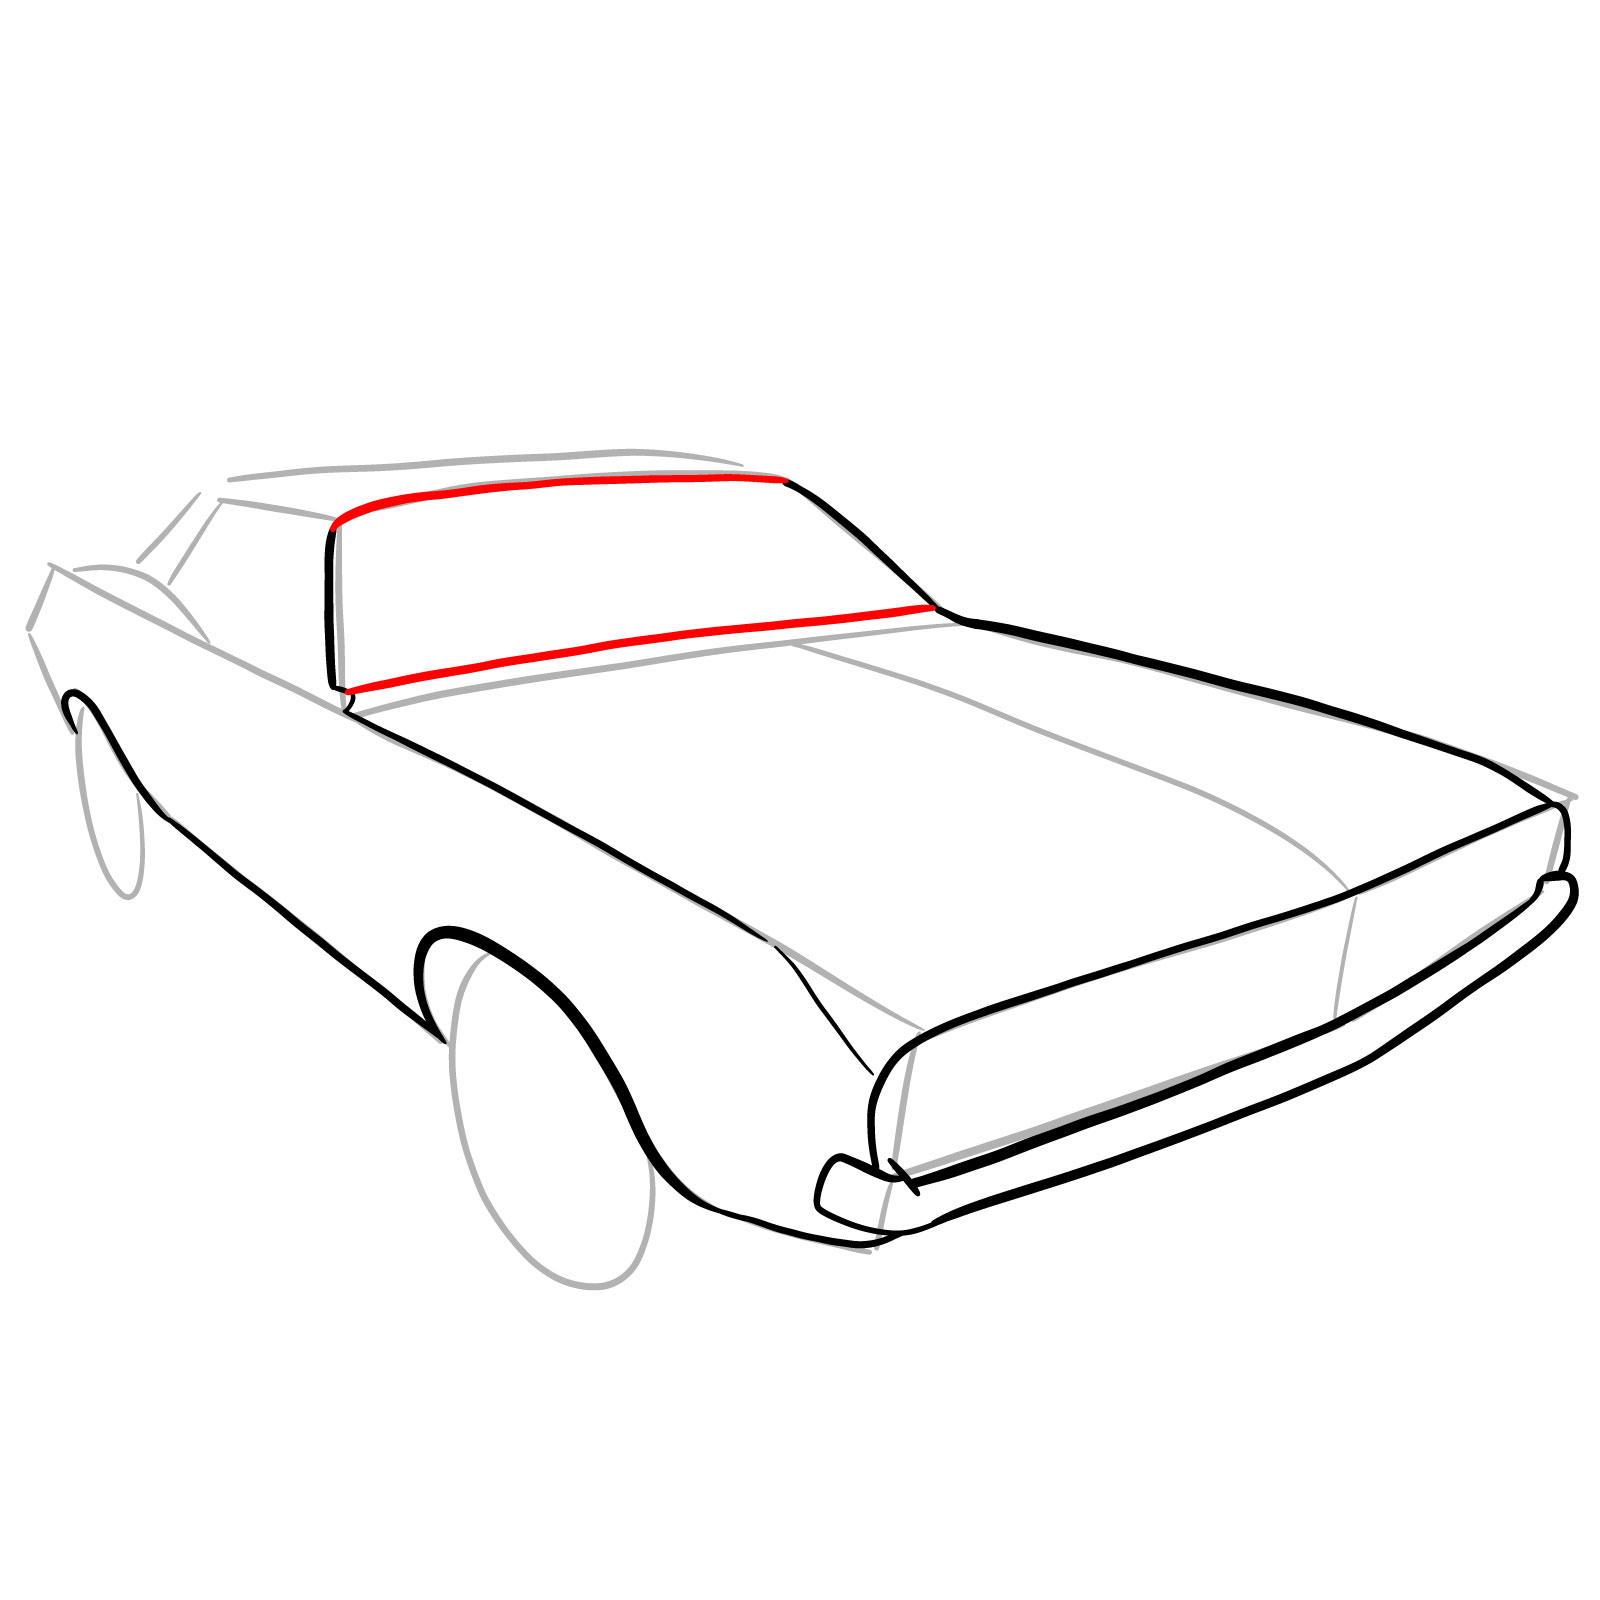 How to draw Dodge Challenger 1970 - step 11